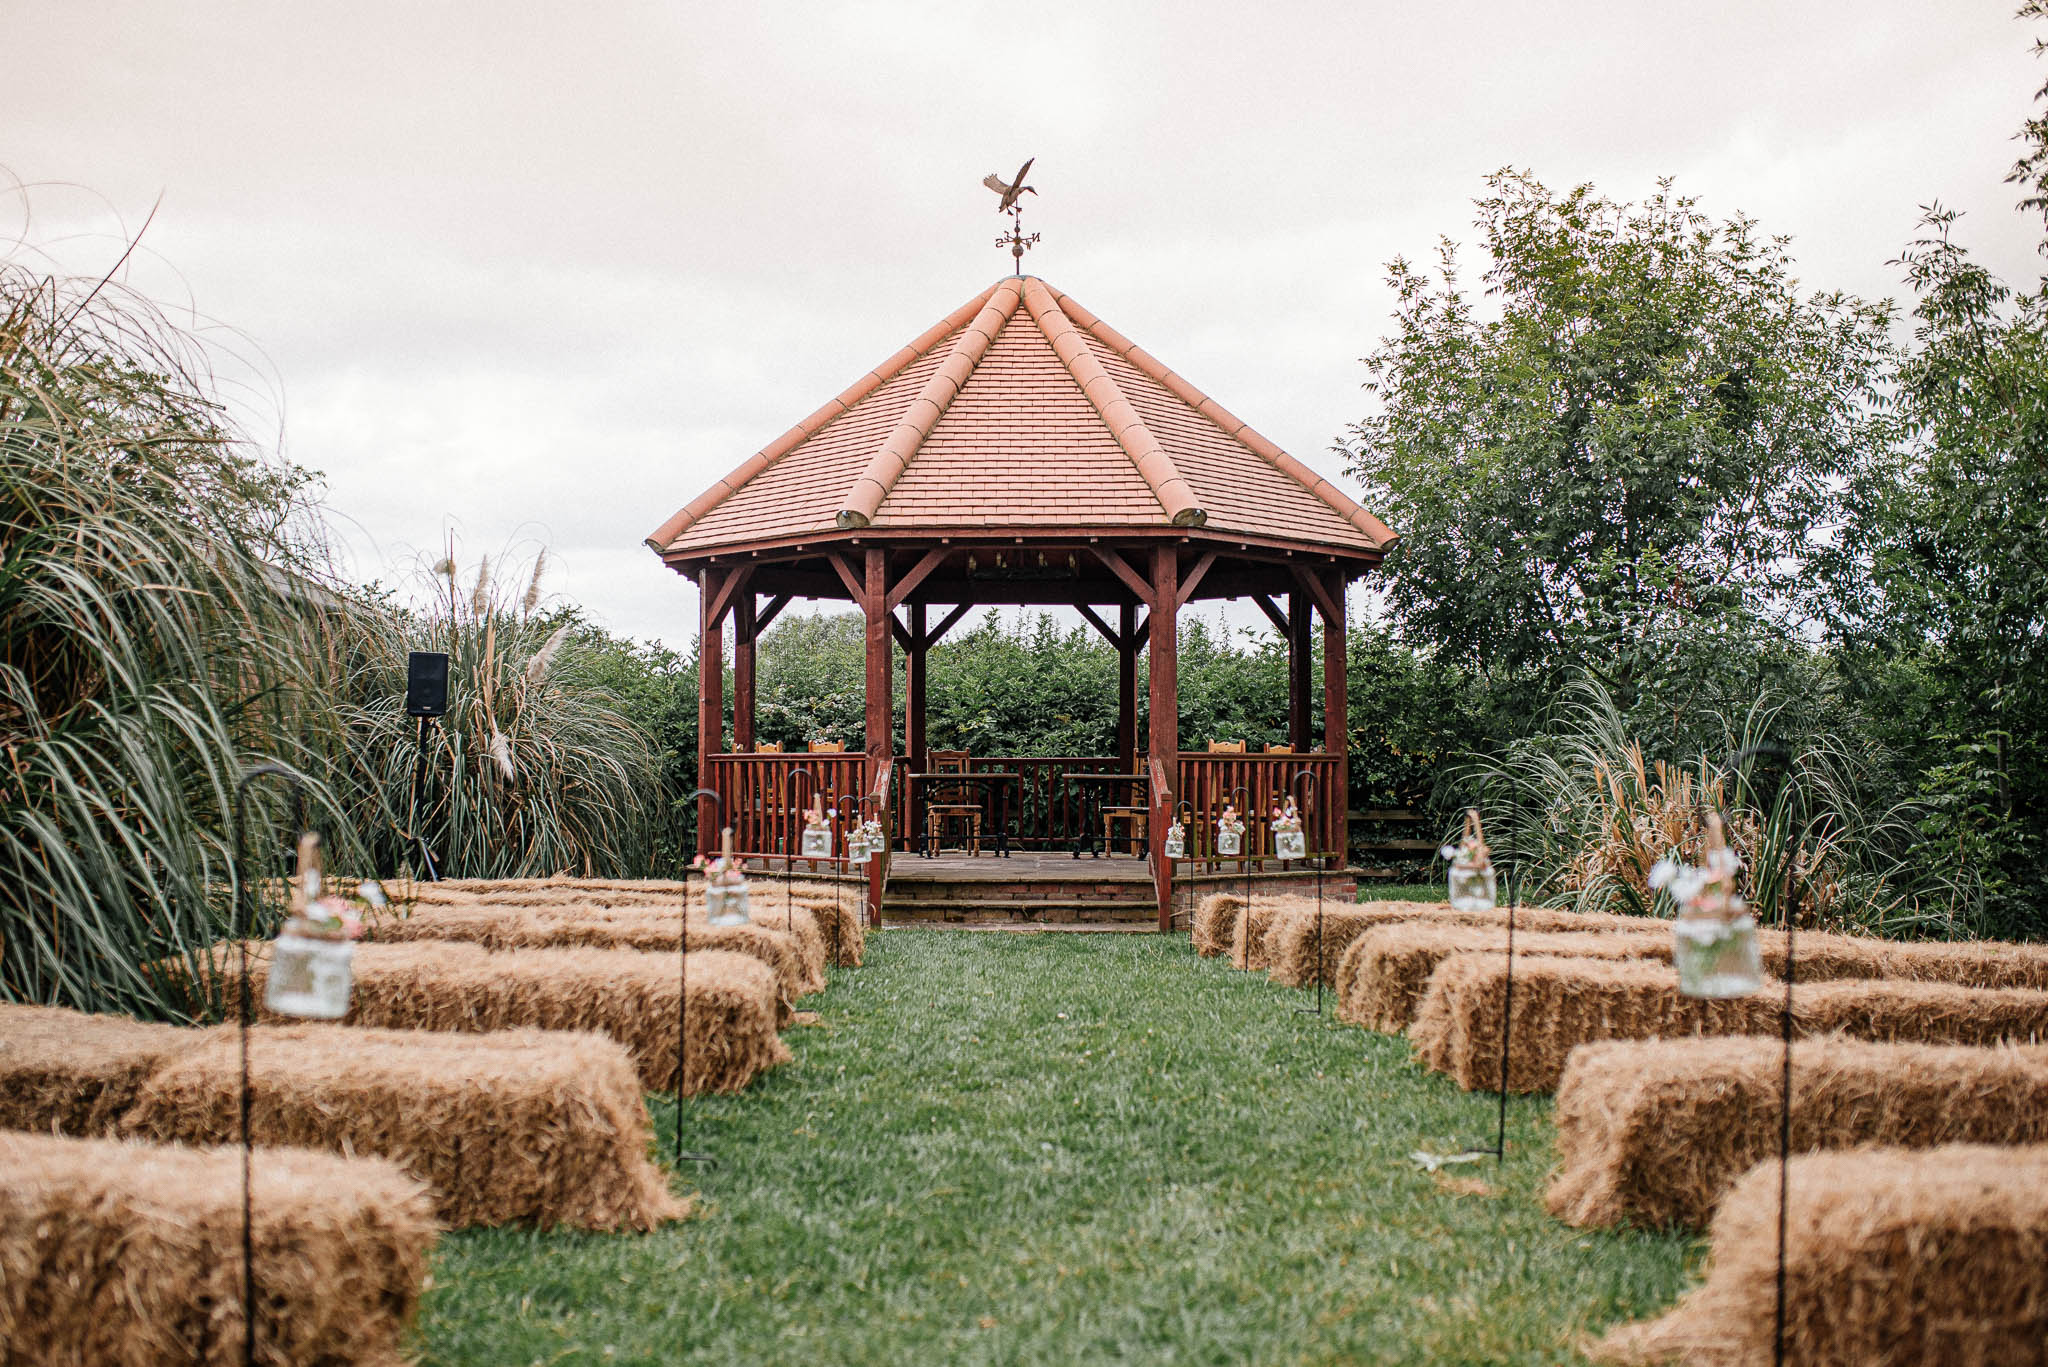 In England, outdoor wedding venues must have a permanent and fixed structure with a roof where couples can get married.